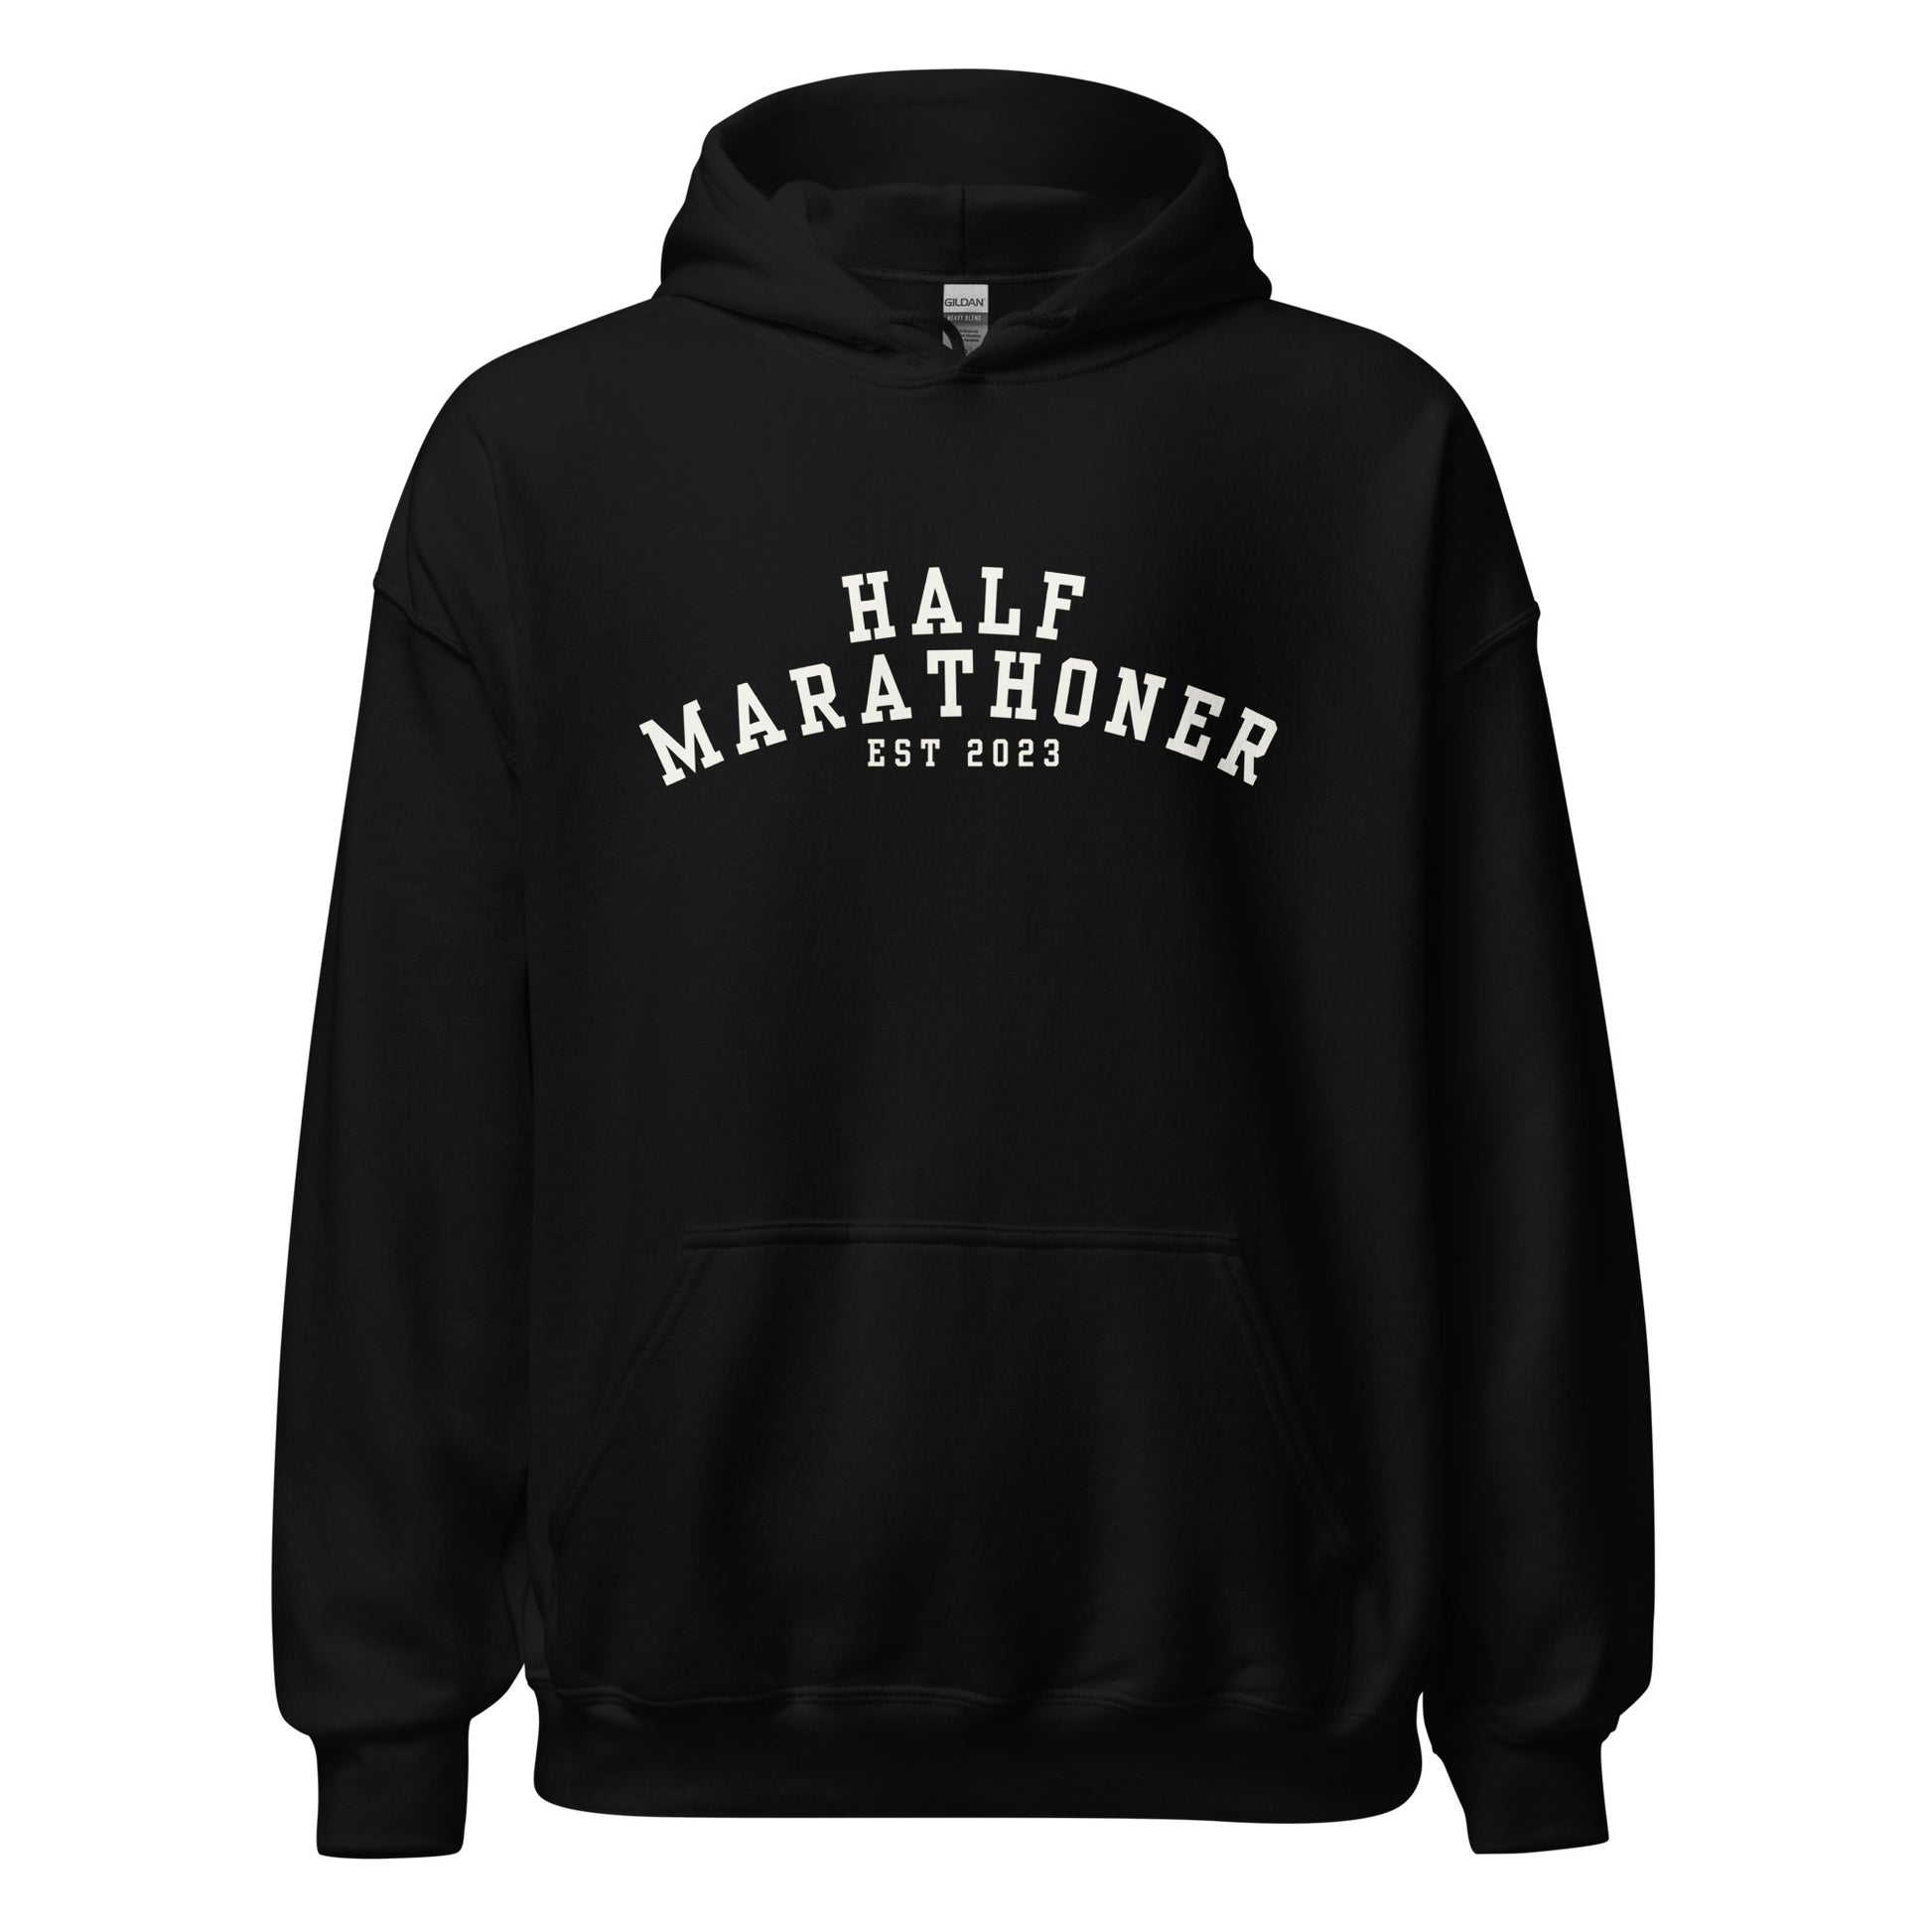 black hoodie with the words half marathoner est 2023 across the chest in a white font